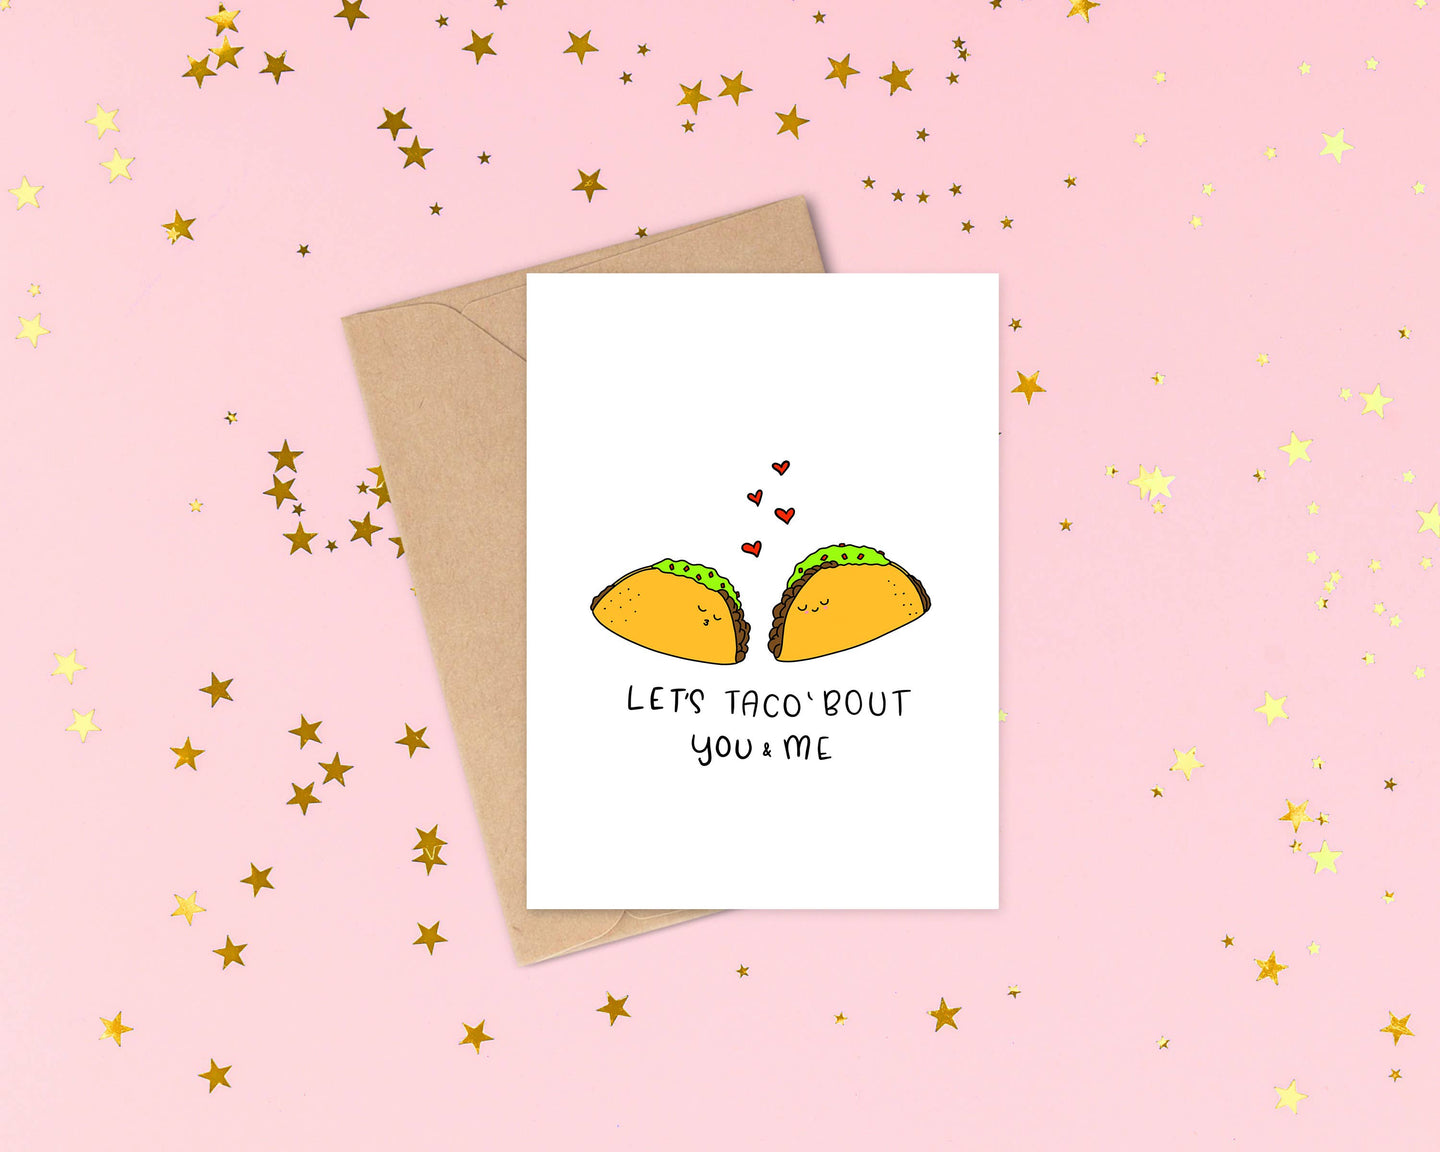 Taco Bout You & Me Love Card